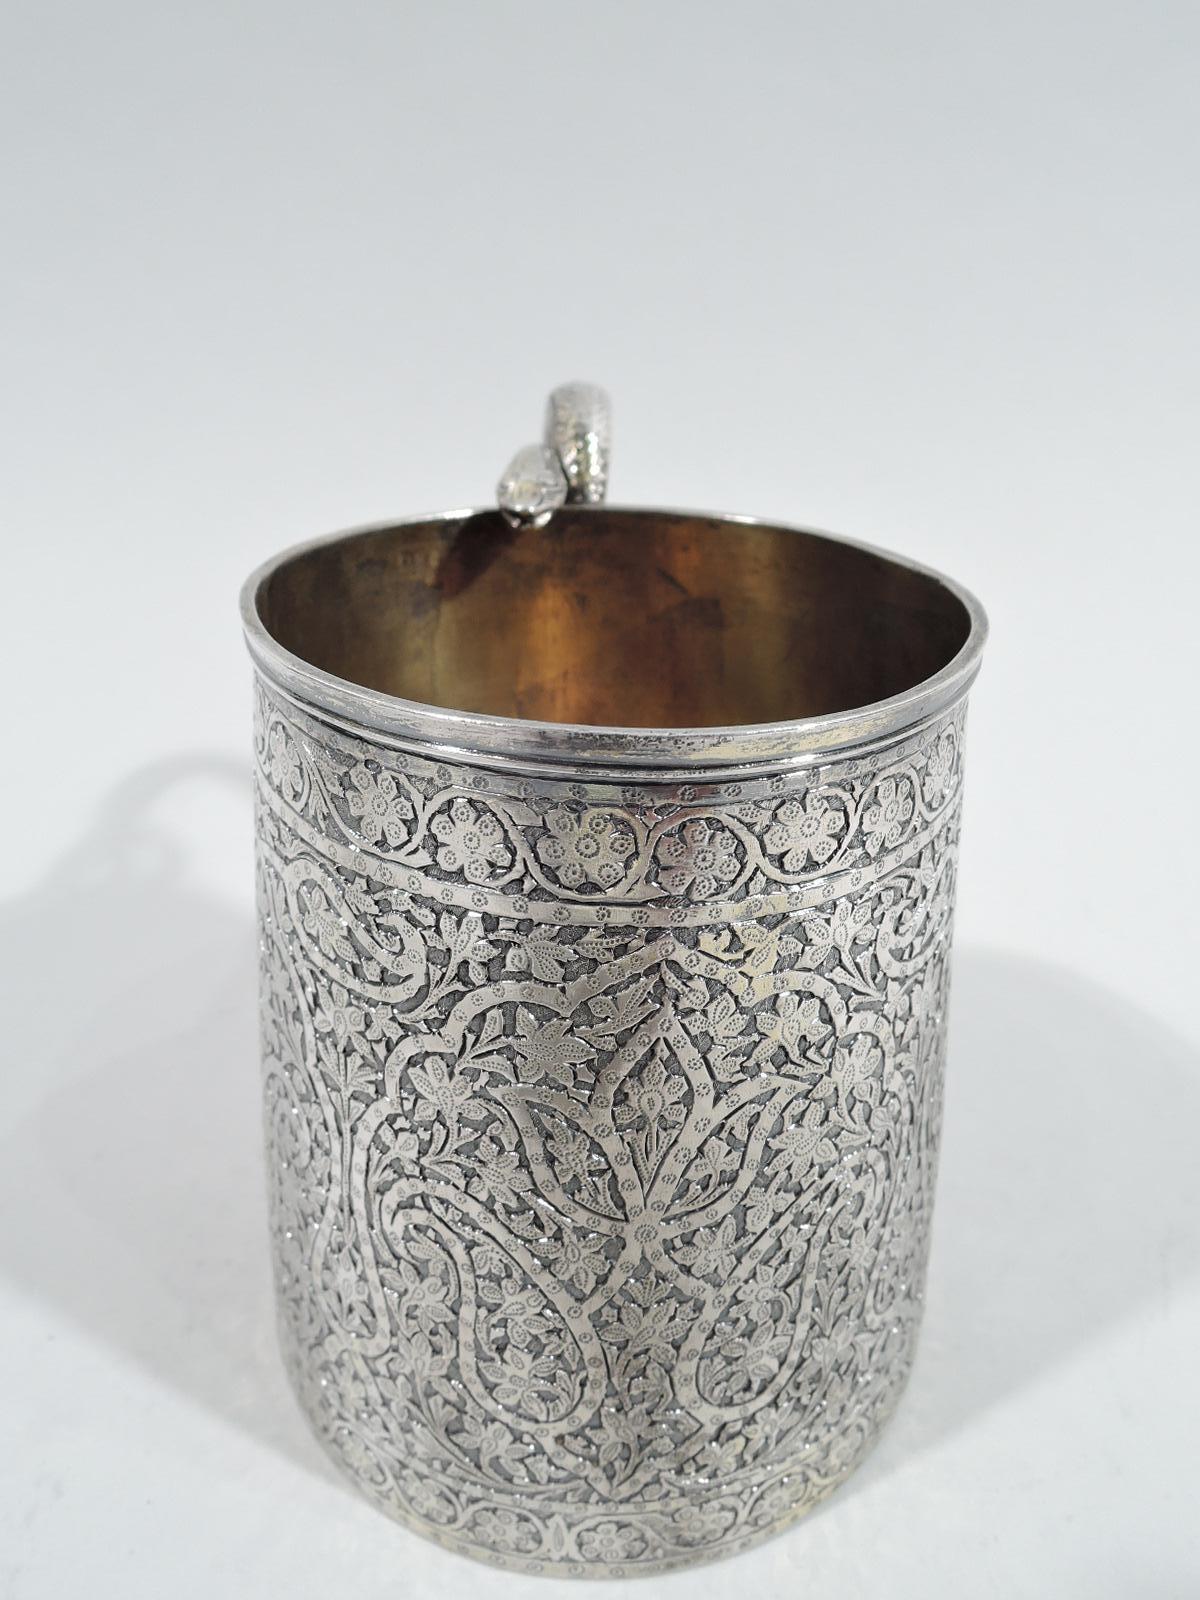 Striking Indian Colonial silver mug, 19th century. Straight and upward tapering sides worked with dense scrolls and flowers. Scrolled and scaly snake handle with head resting on rim. Gilt interior. Unmarked. Weight: 7.5 troy ounces.